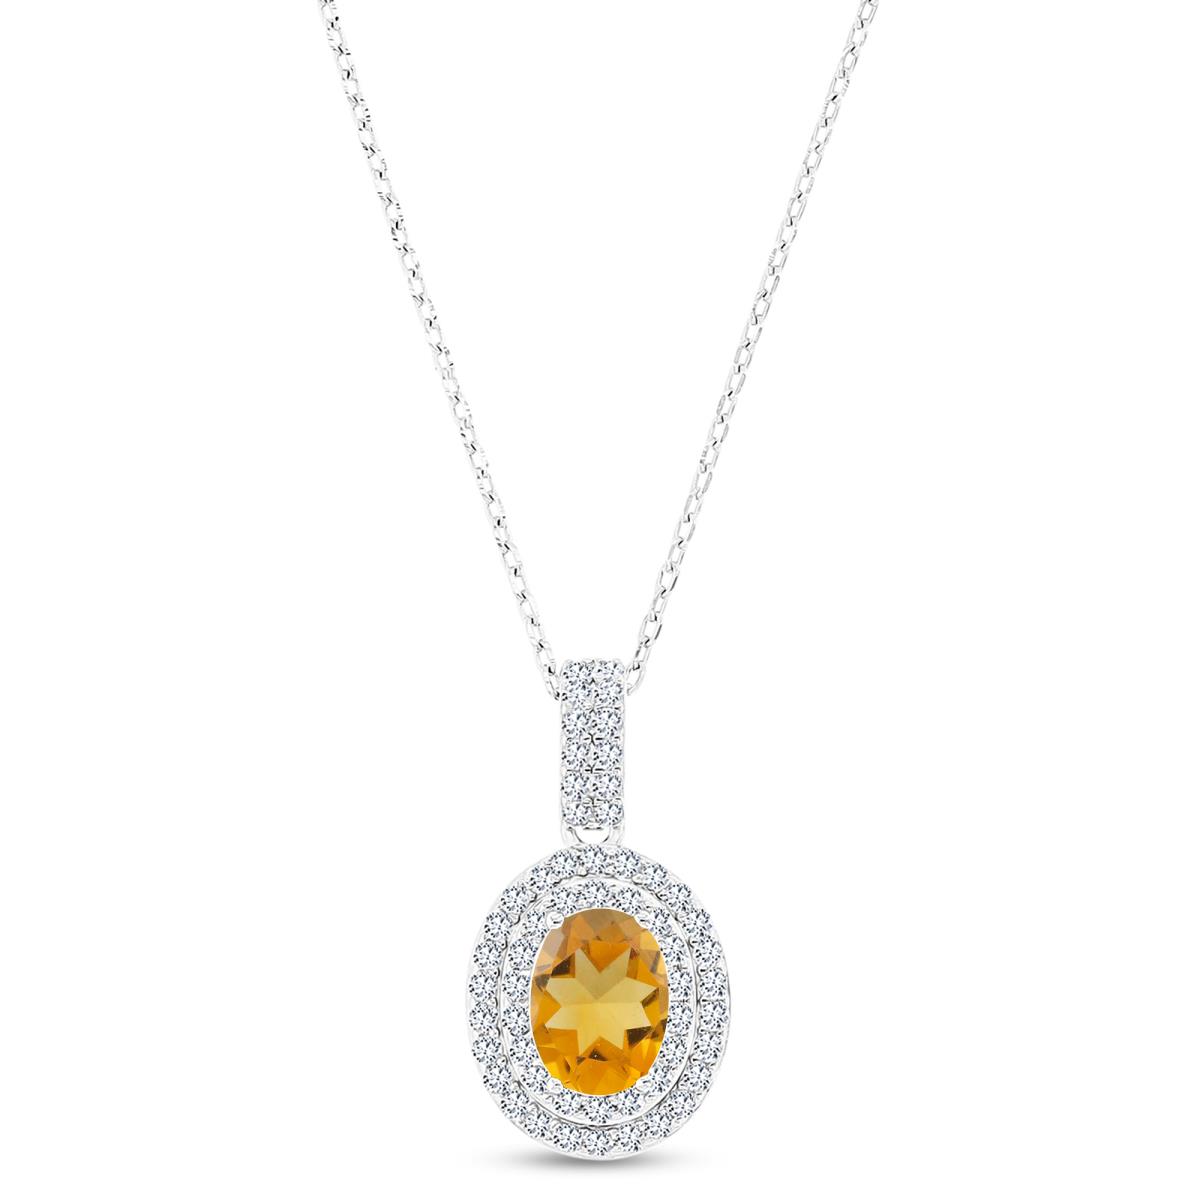 Sterling Silver Rhodium 8x6mm Oval Citrine & Cr White Sapphire Halo 16"+2" Necklace